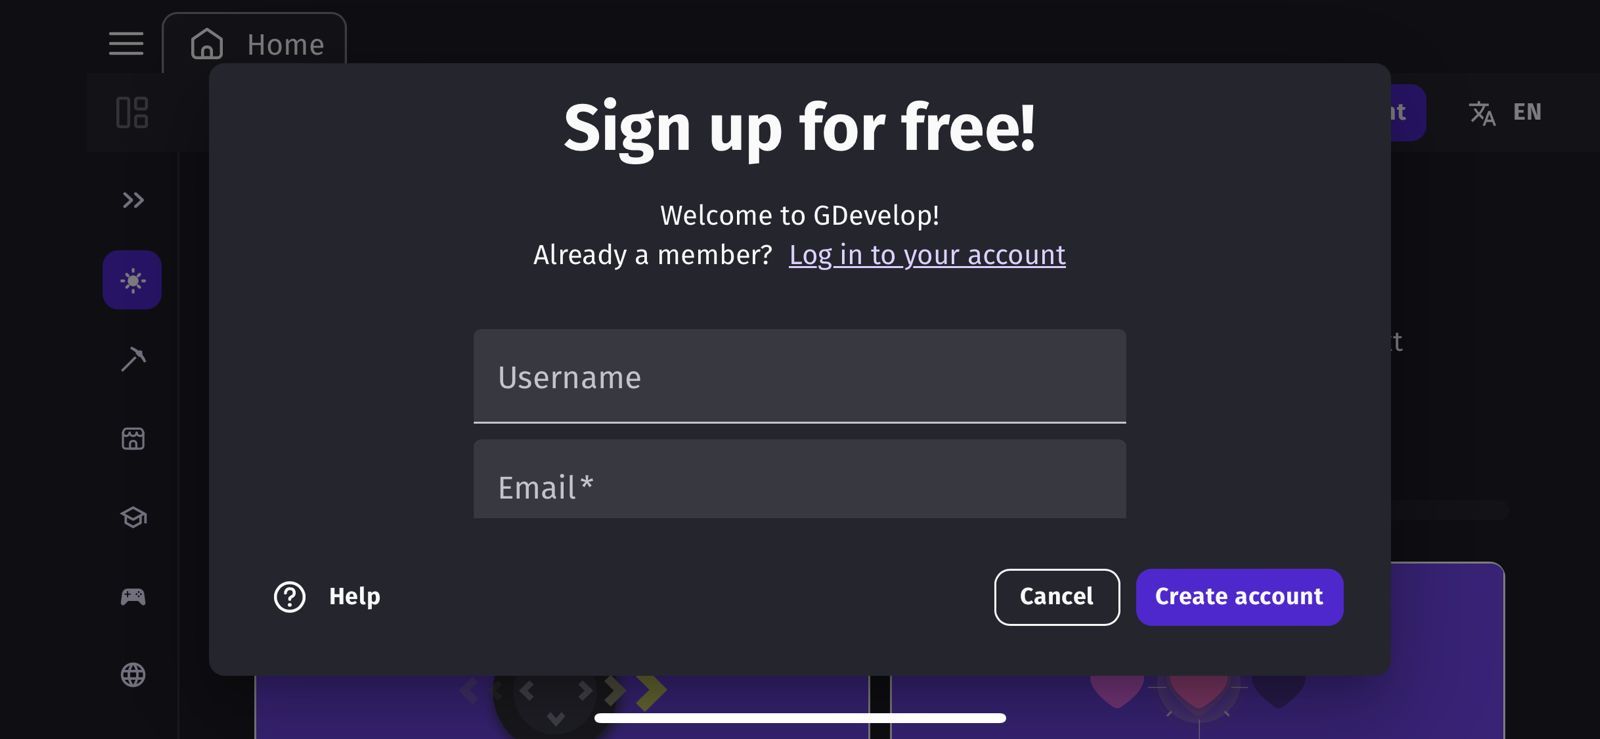 Sign up for a GDevelop account